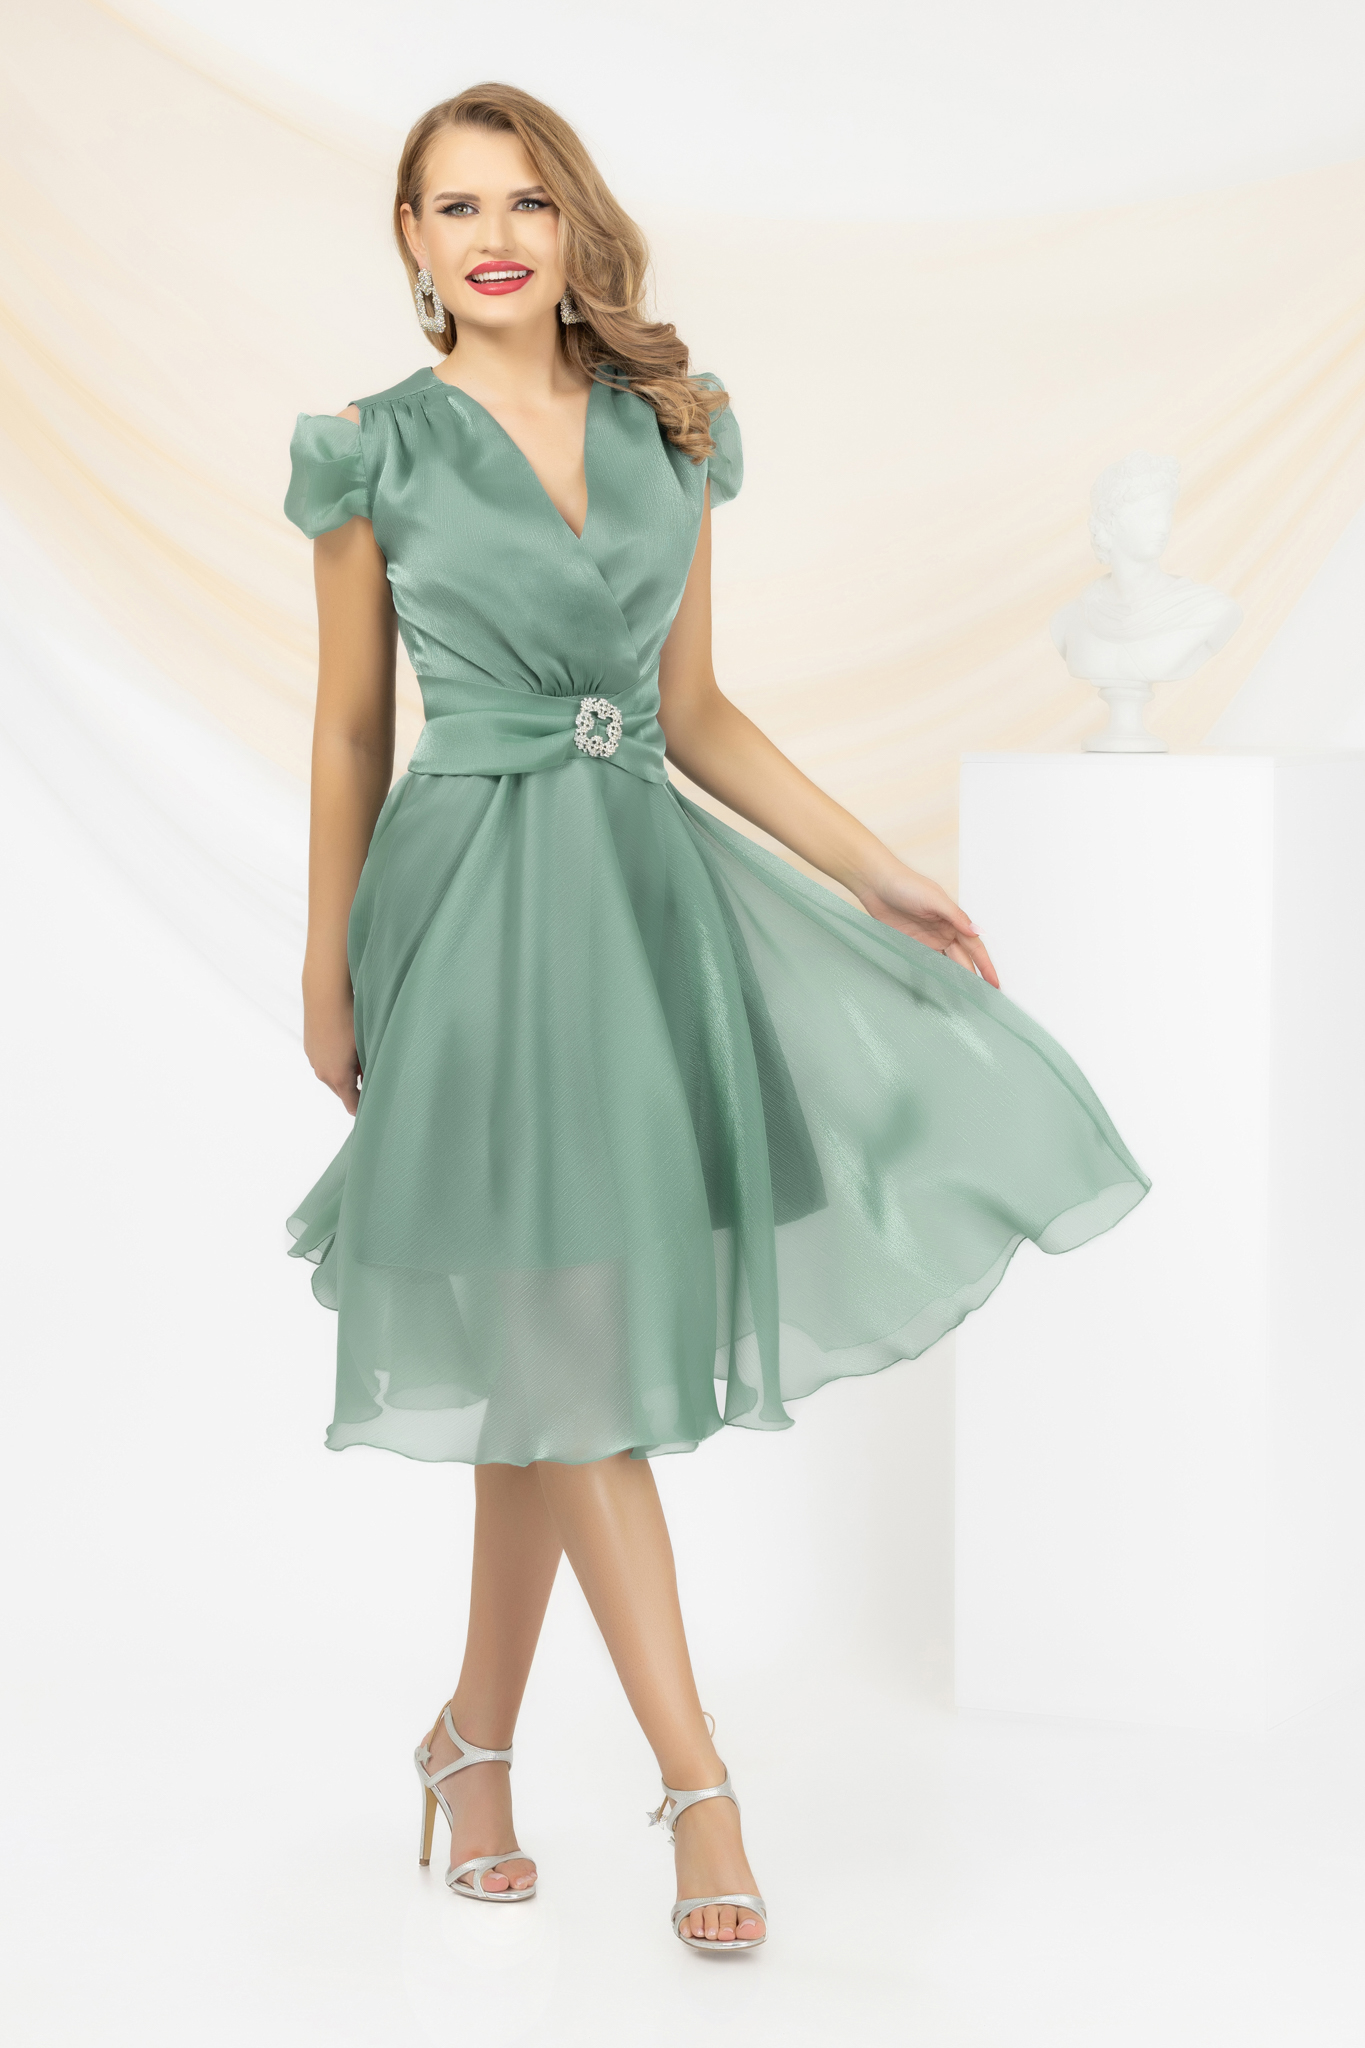 Mint dress from veil fabric accessorized with tied waistband strass